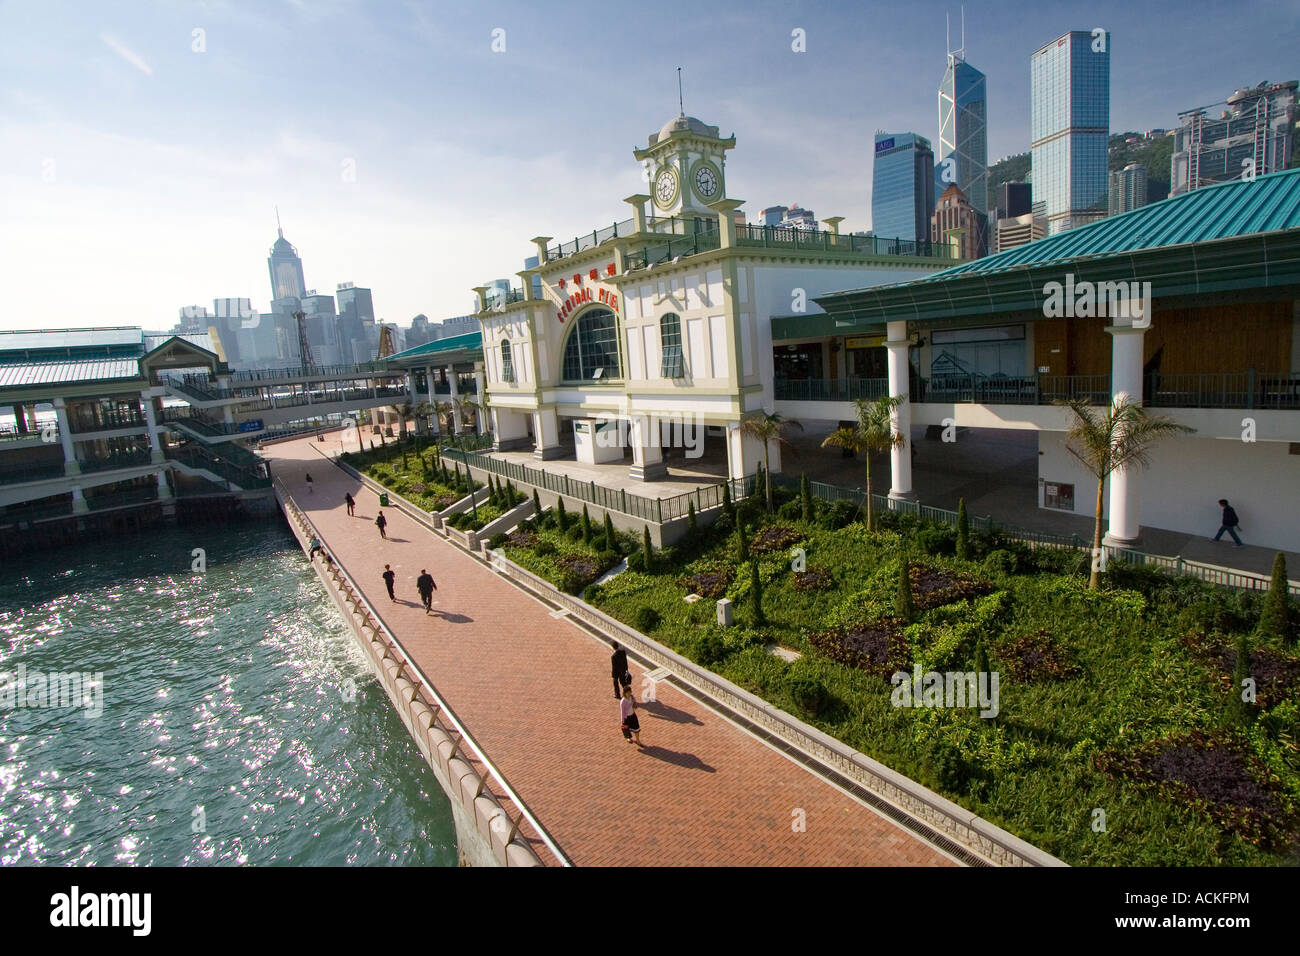 New Central Pier Hong Kong Banque D'Images